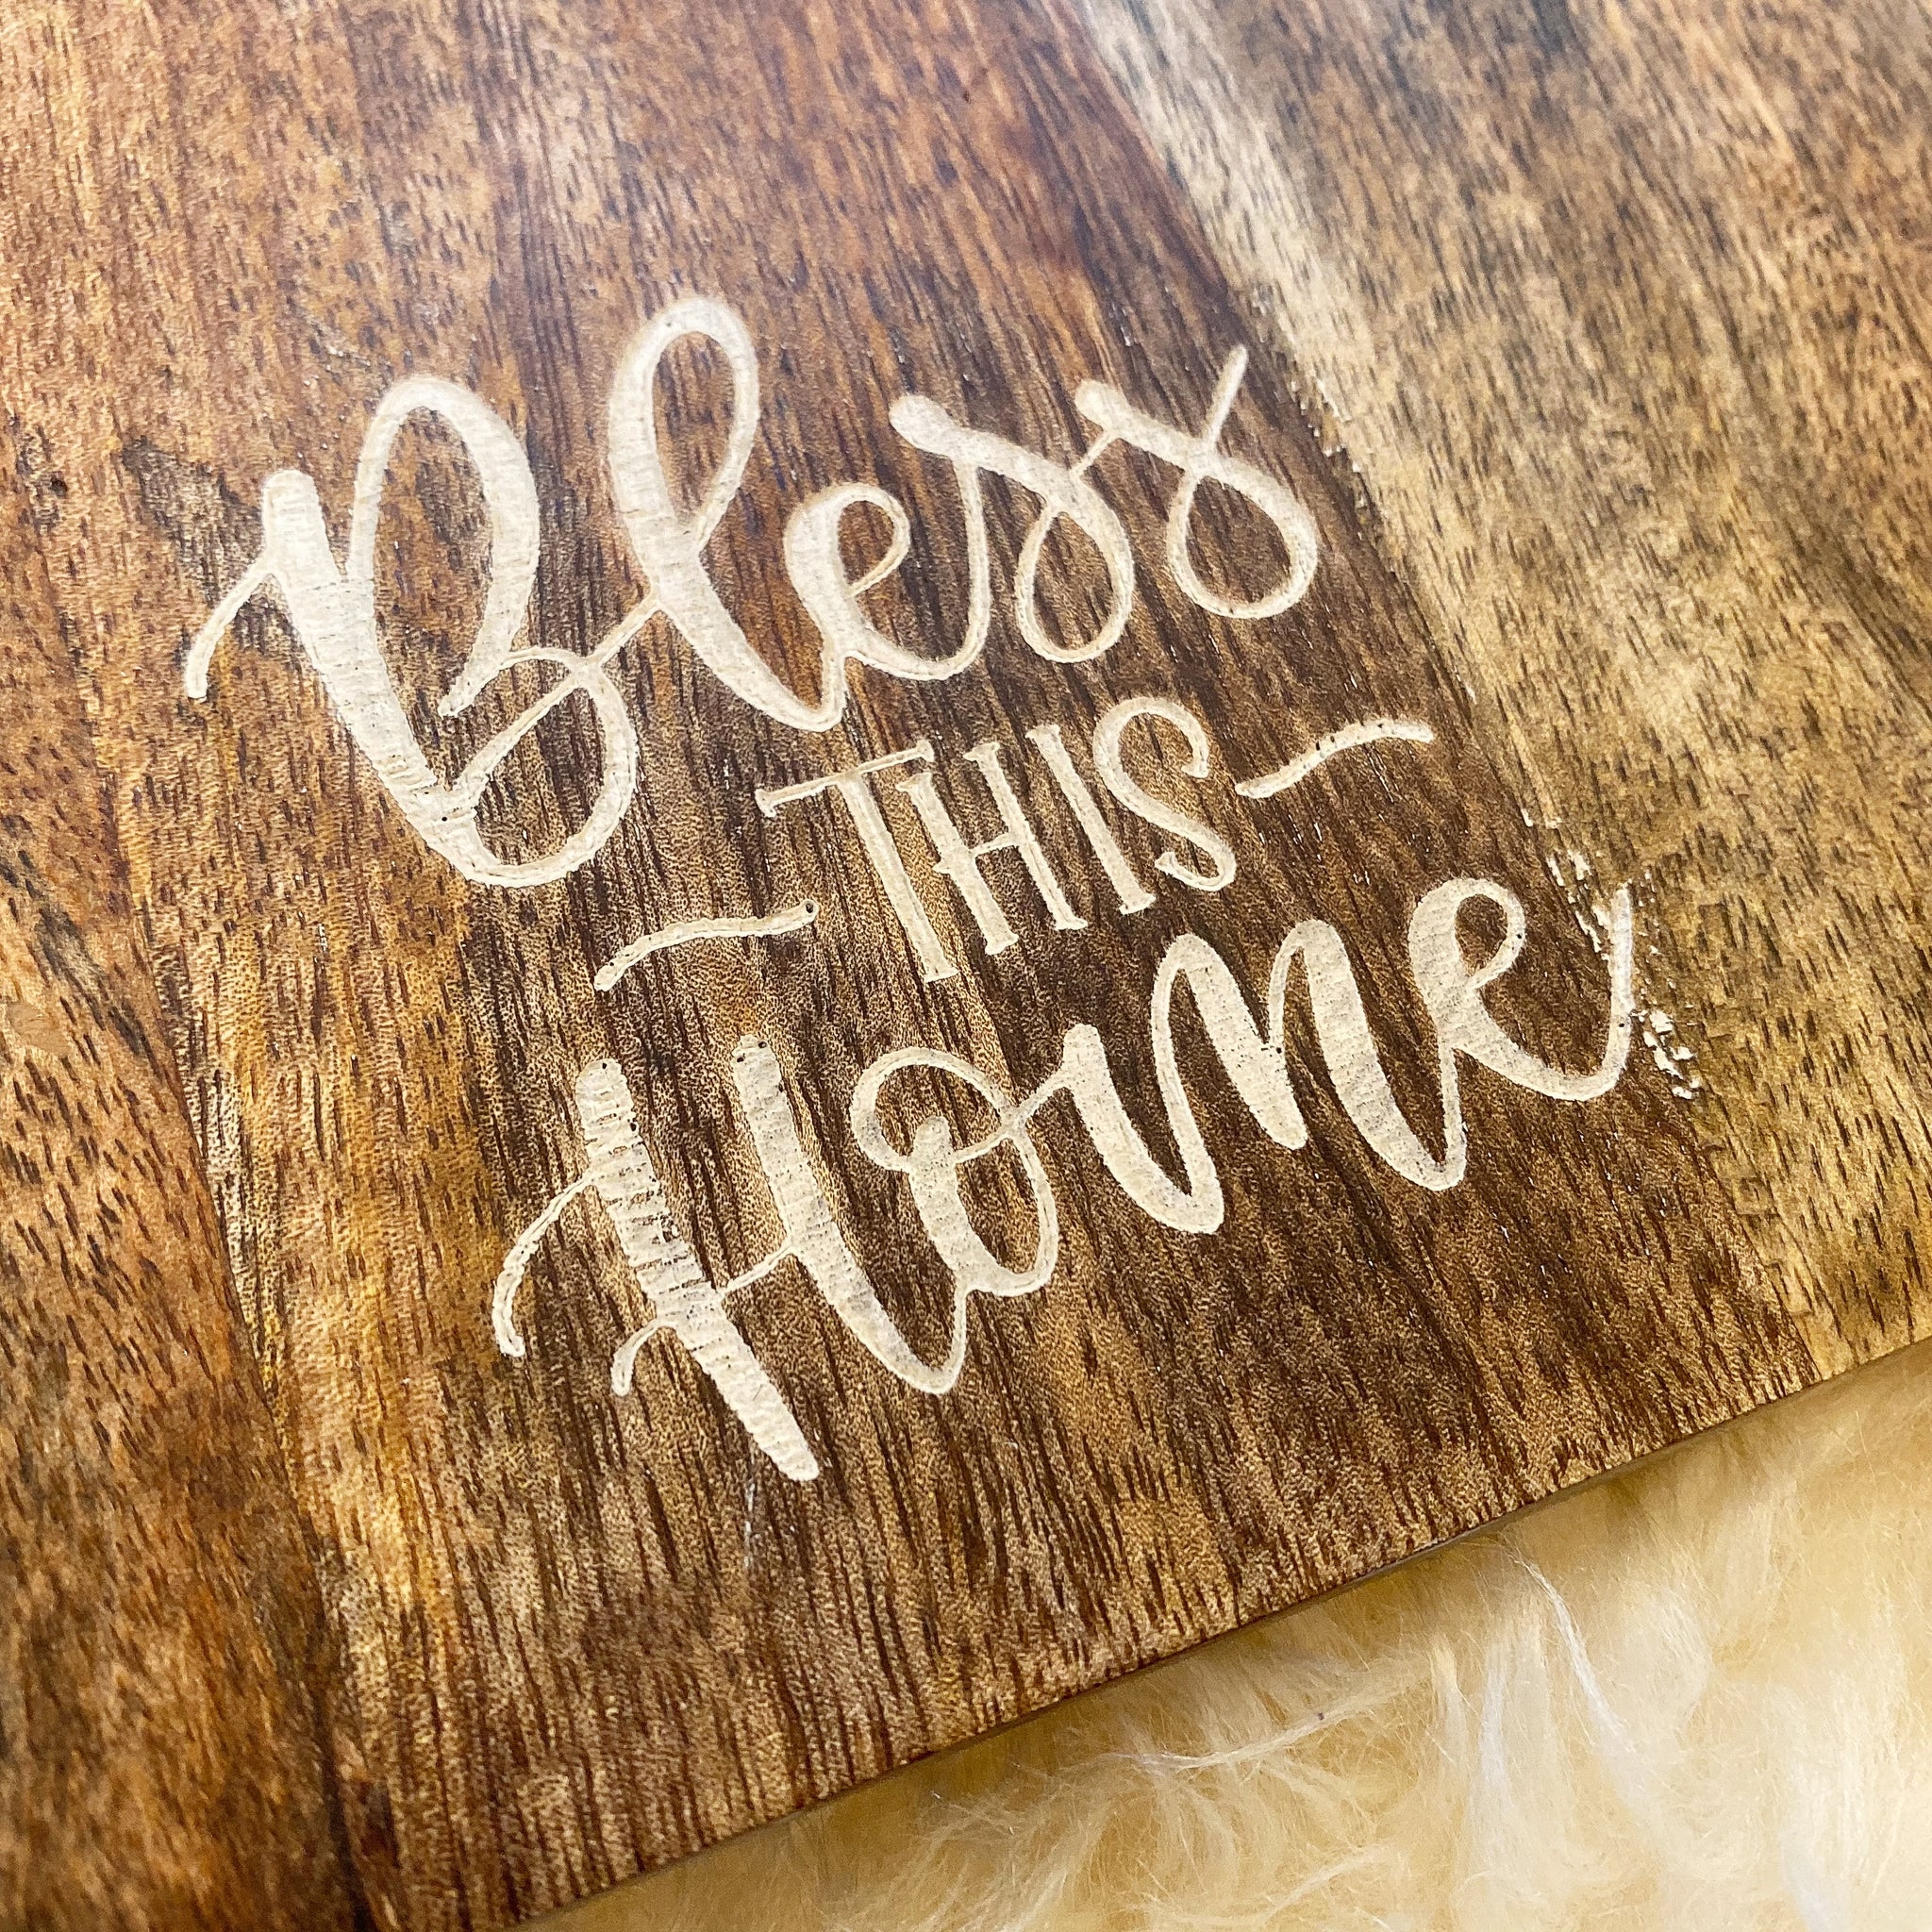 "bless this home" charcuterie board with resin and amber recycled glass